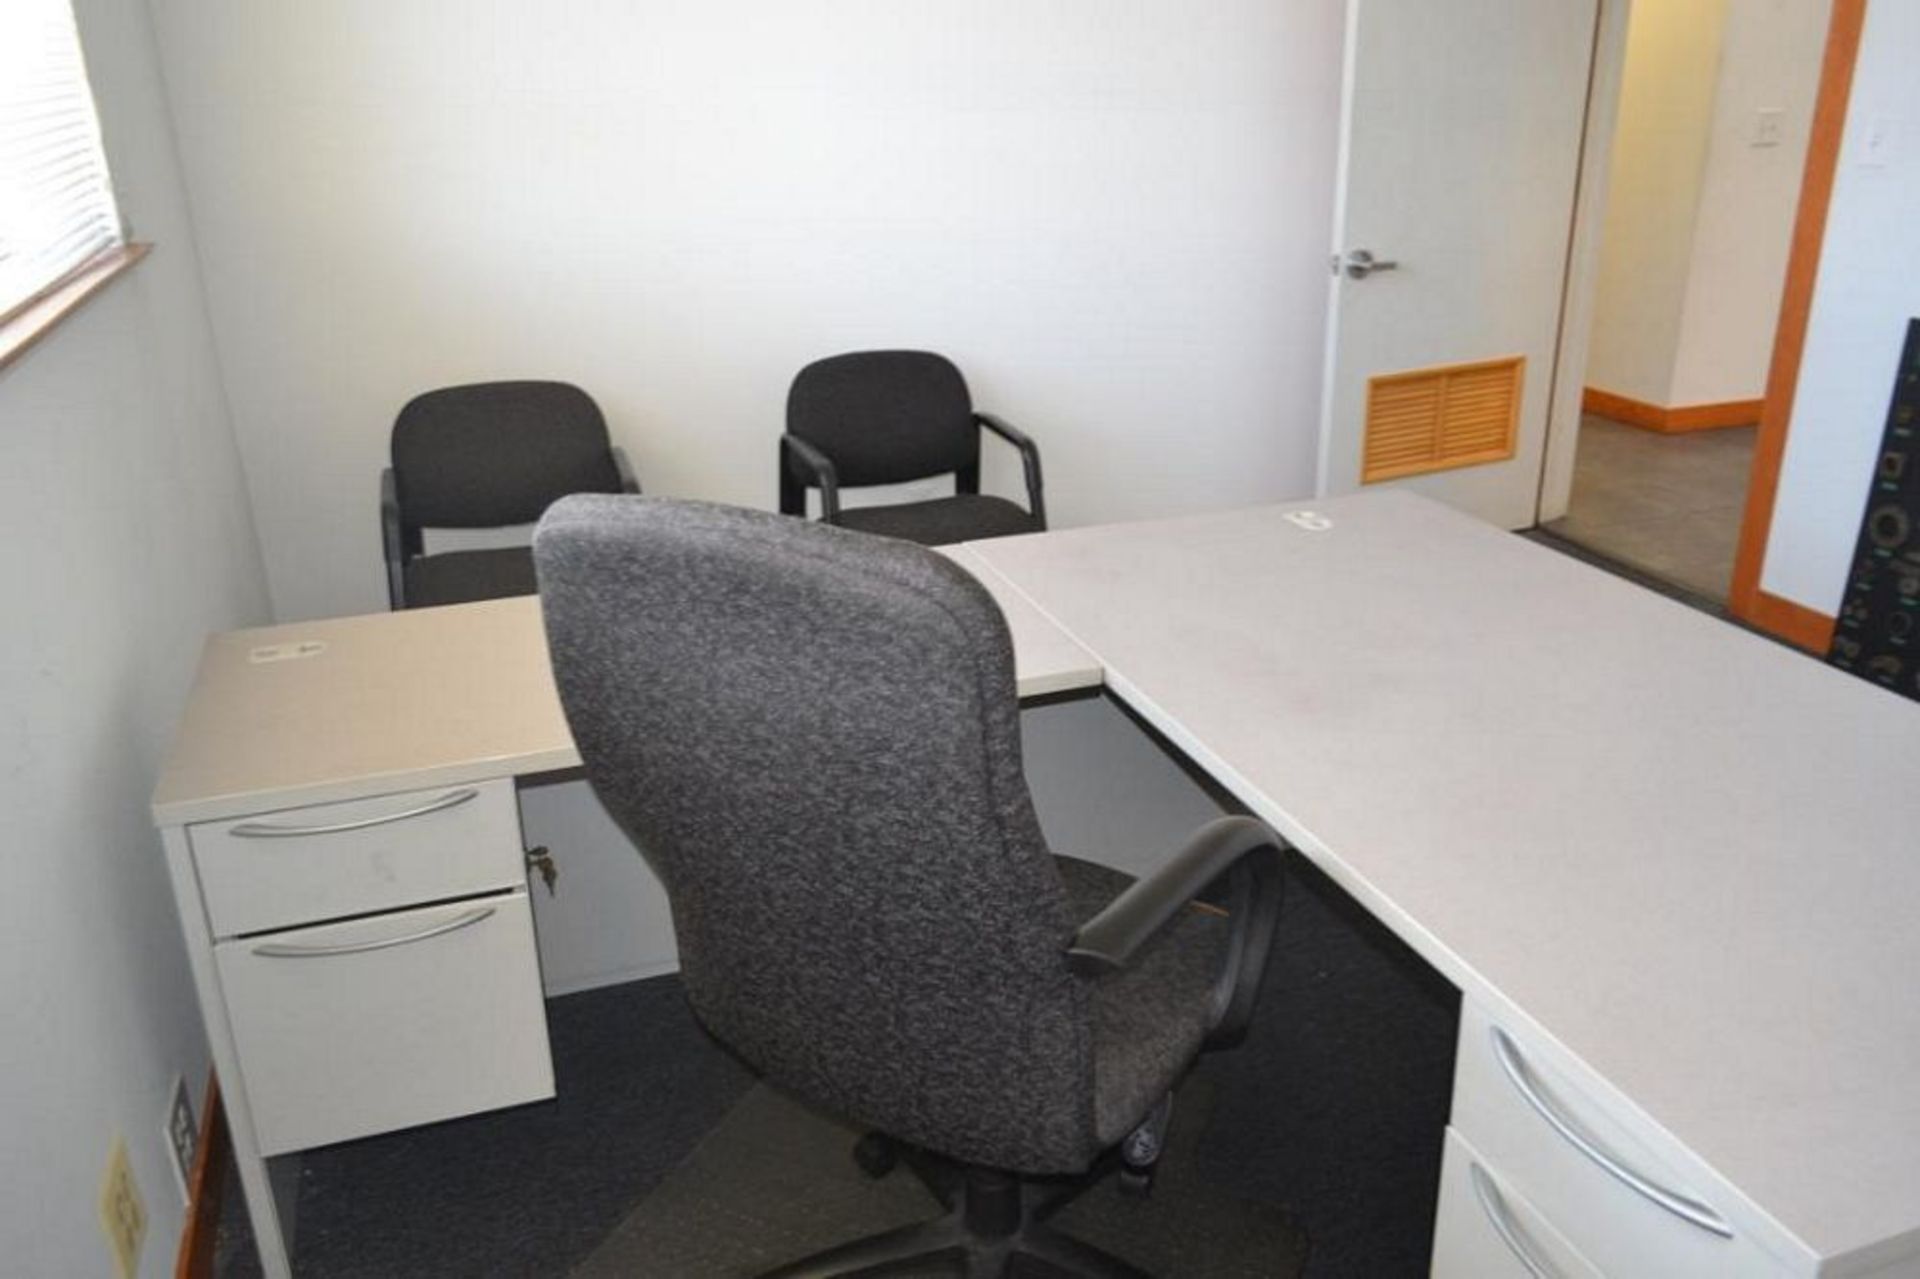 LOT: Contents of (2) Offices including (2) L-Shaped Desks, (2) File Cabinets, (5) Chairs - Image 2 of 4